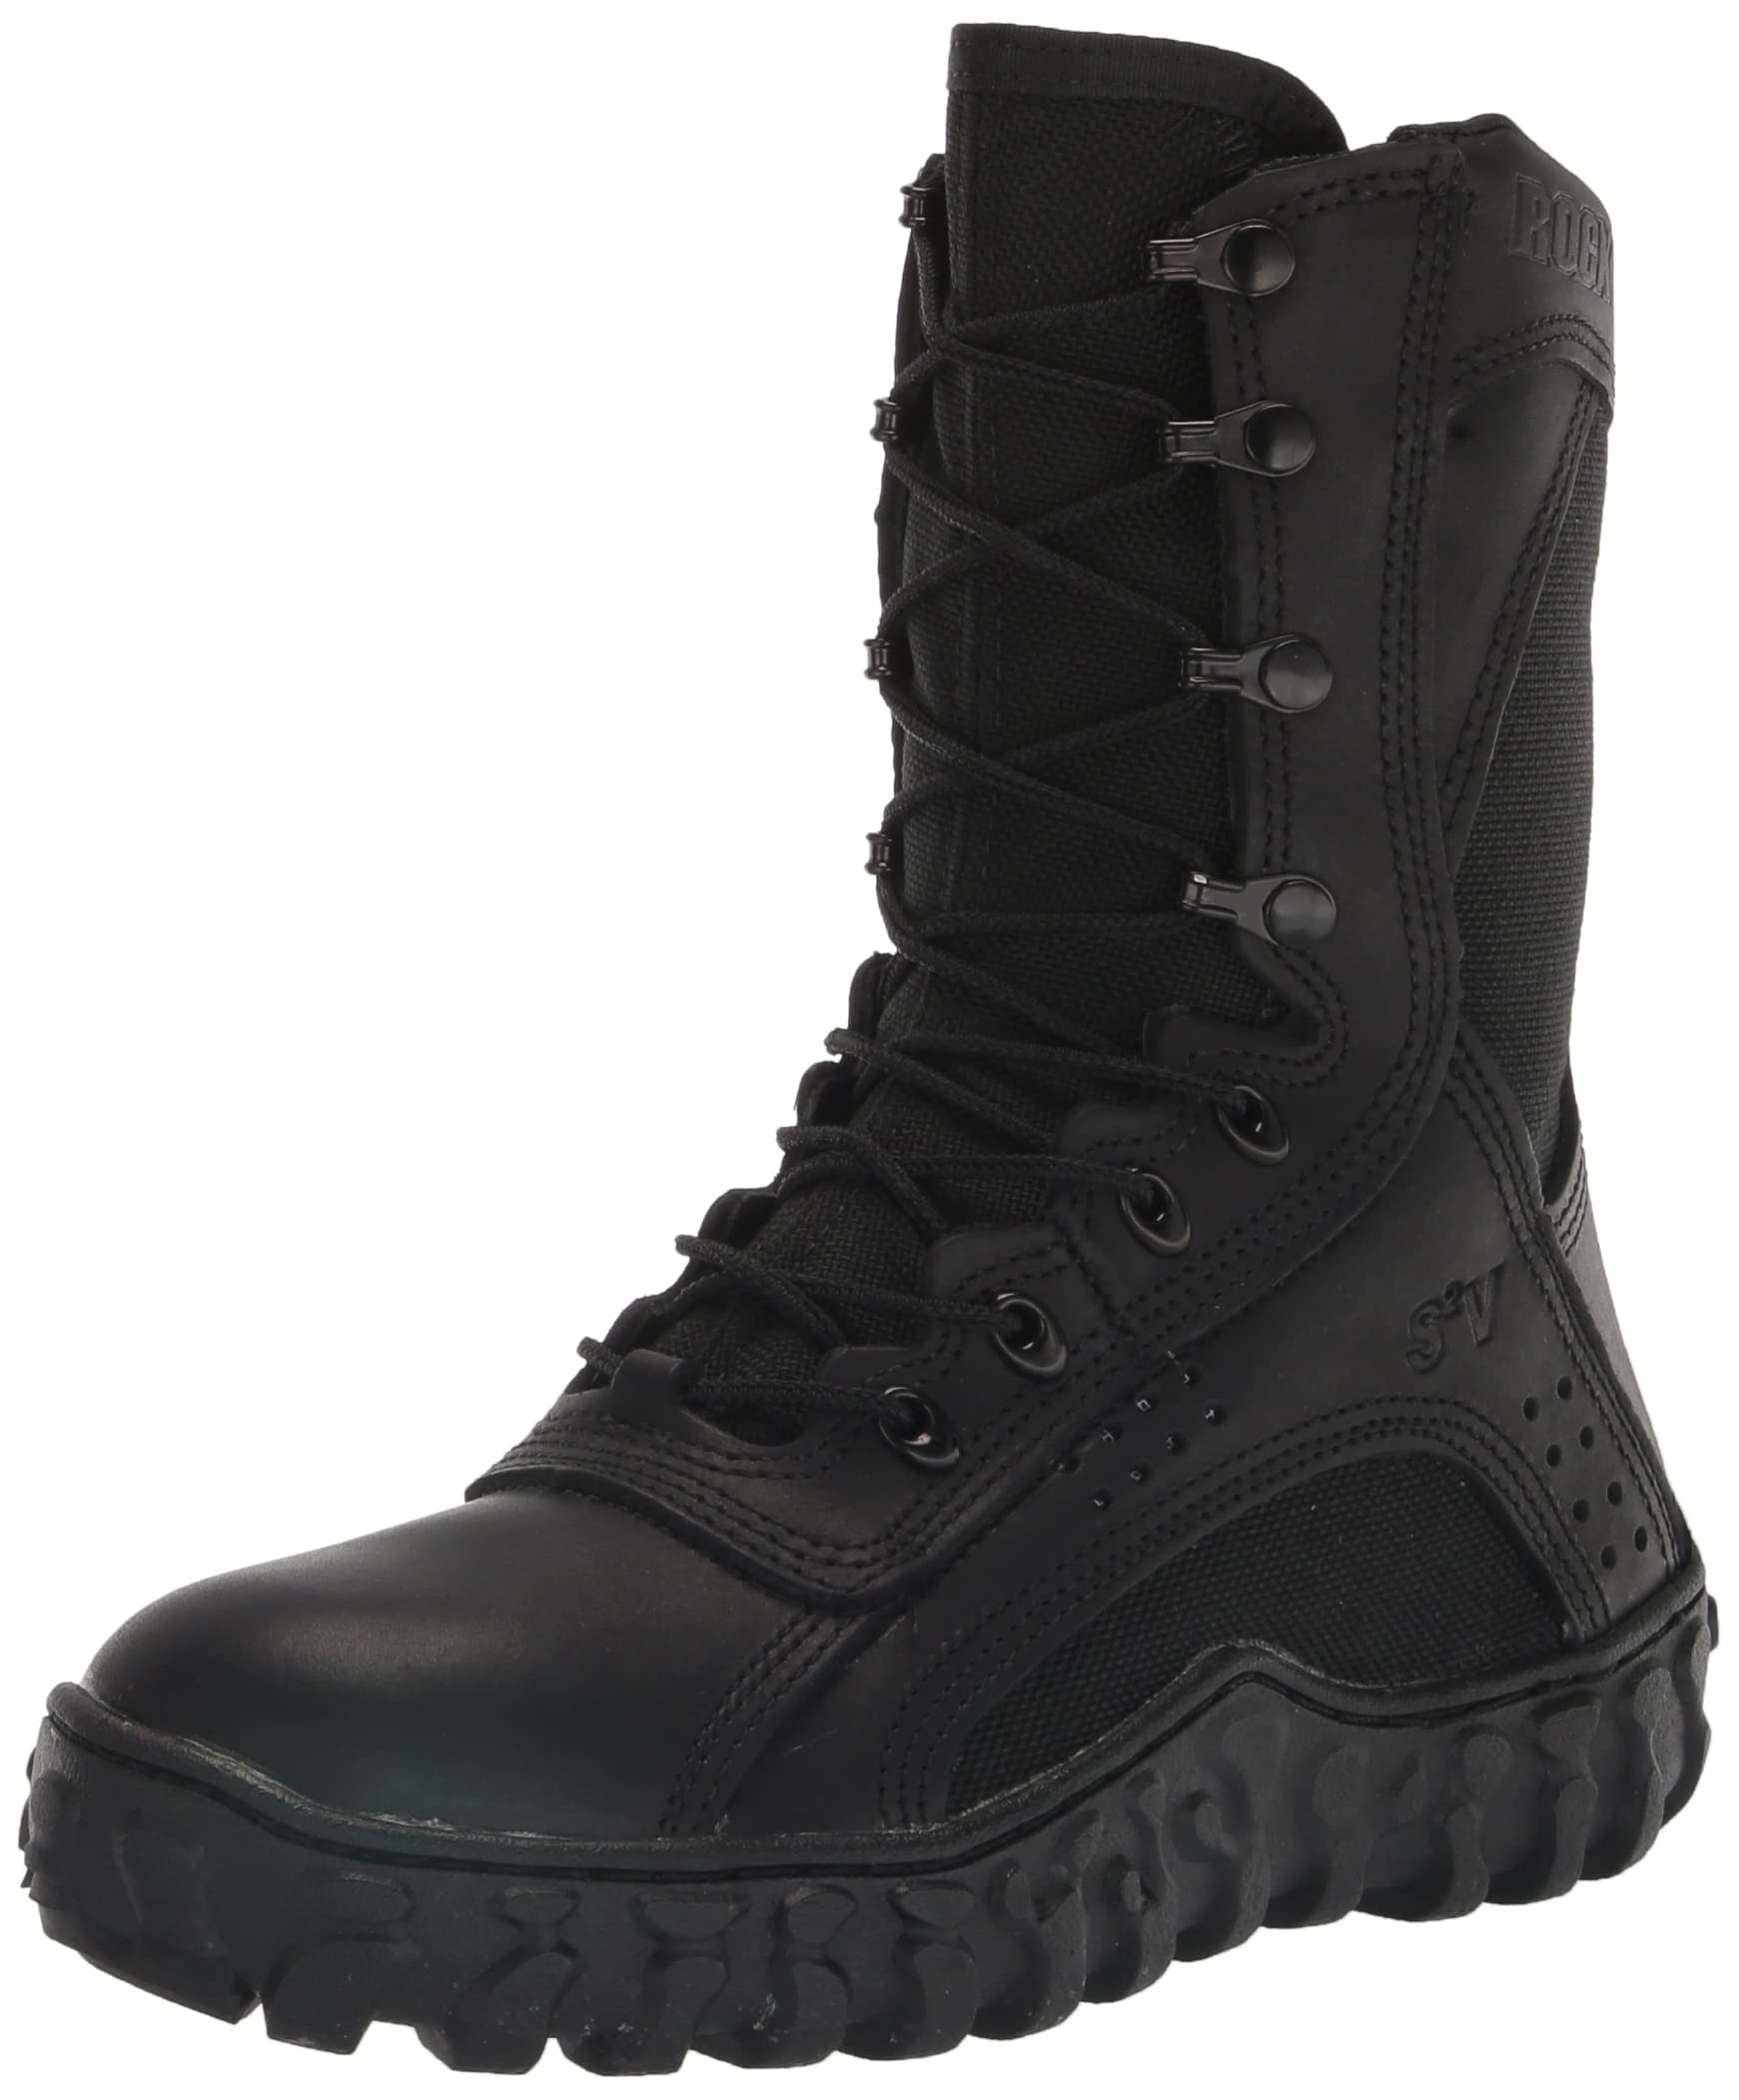 Rocky Men's FQ0000102 Military and Tactical Boot, Black, 15 W US